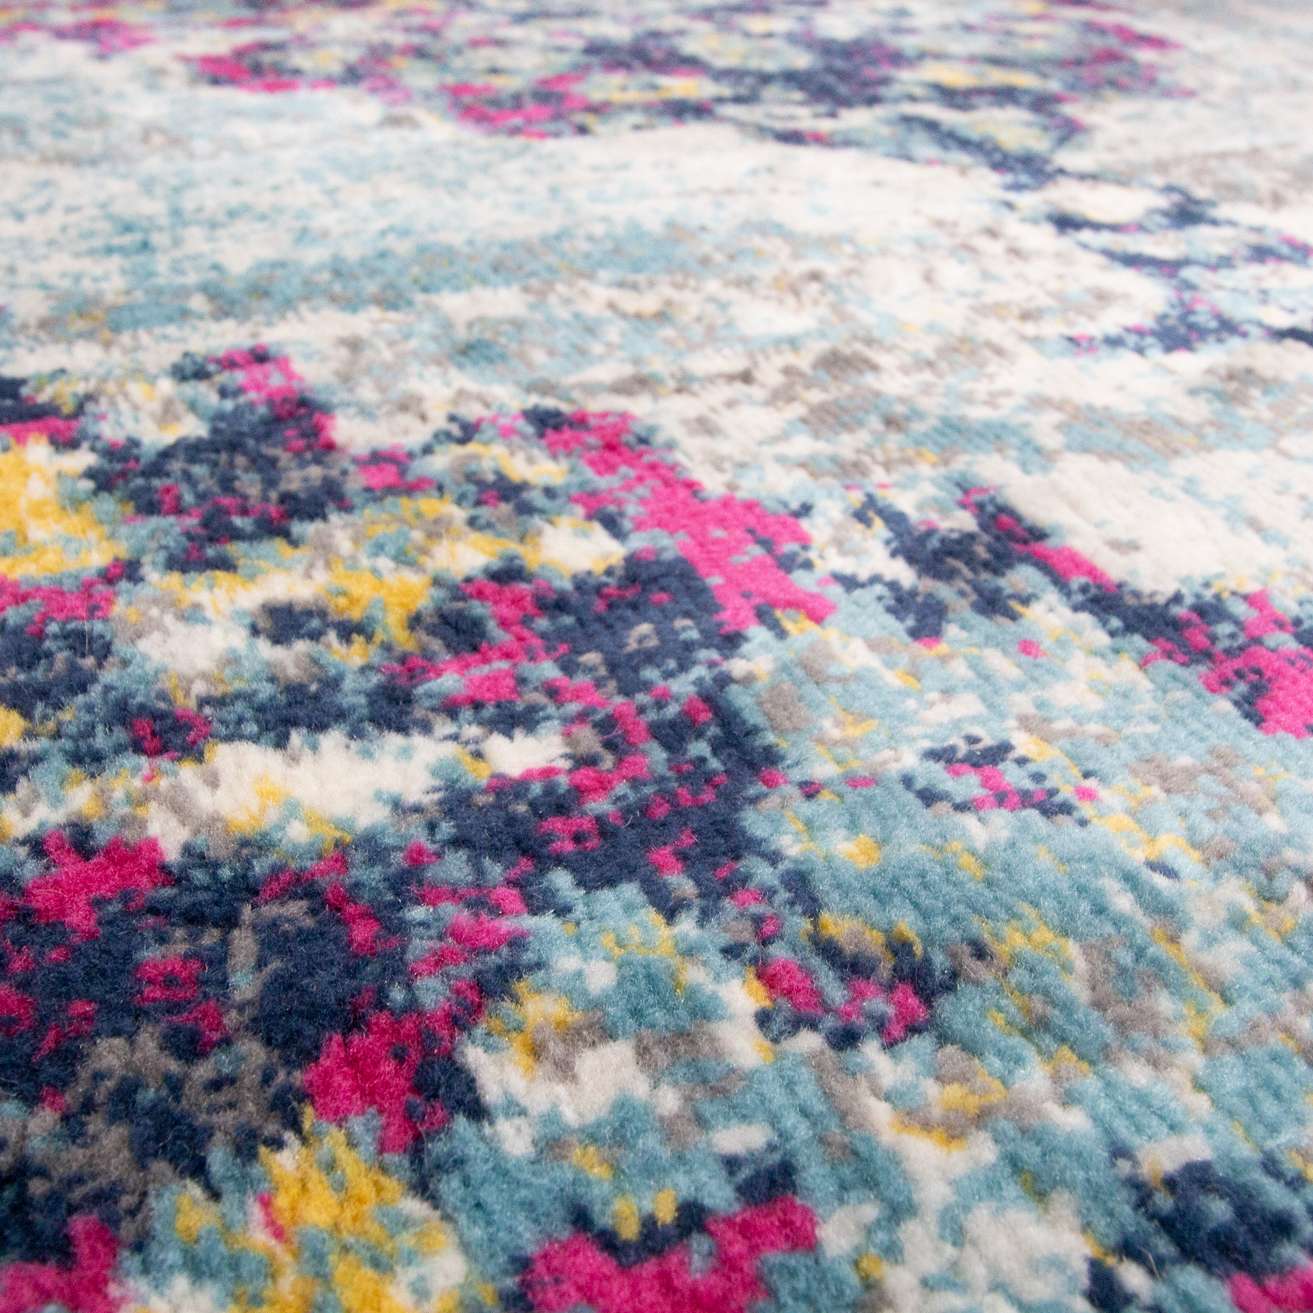 Faded Distressed Colourful Oriental Pattern Runner  Rug